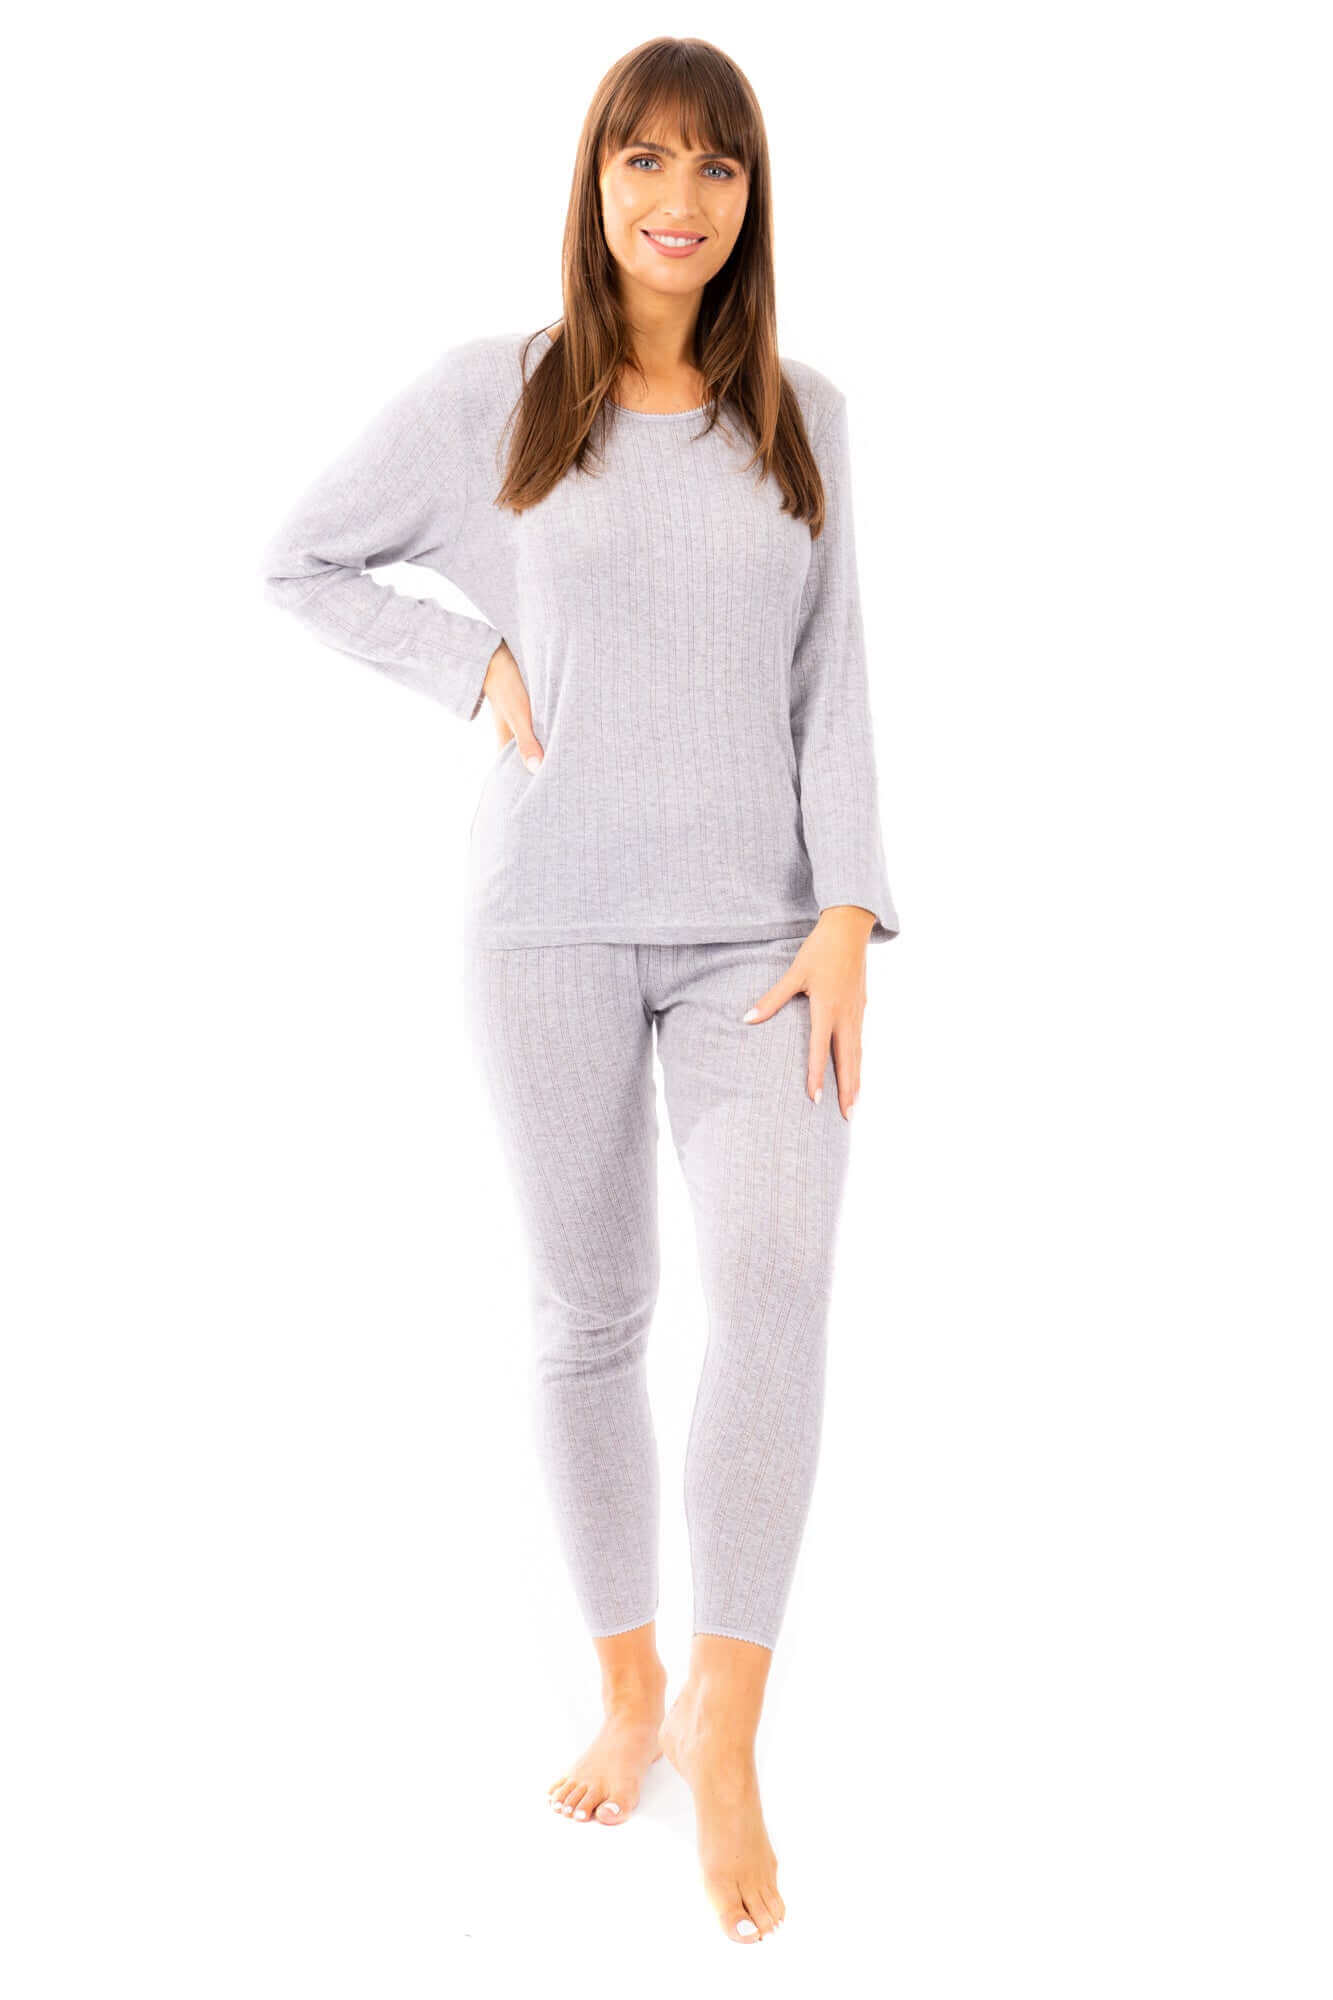 Heatwave® Women's Thermal Long Sleeve Top & Pants Sets, Warm Winter Baselayers. Buy now for £10.00. A Thermal Underwear by Heatwave Thermalwear. 10-12, 14-16, 16-18, 18-20, 20-22, 22-24, 8-10, baselayer, black, bridesmaid, daisy dreamer, grey, gym, heatwa